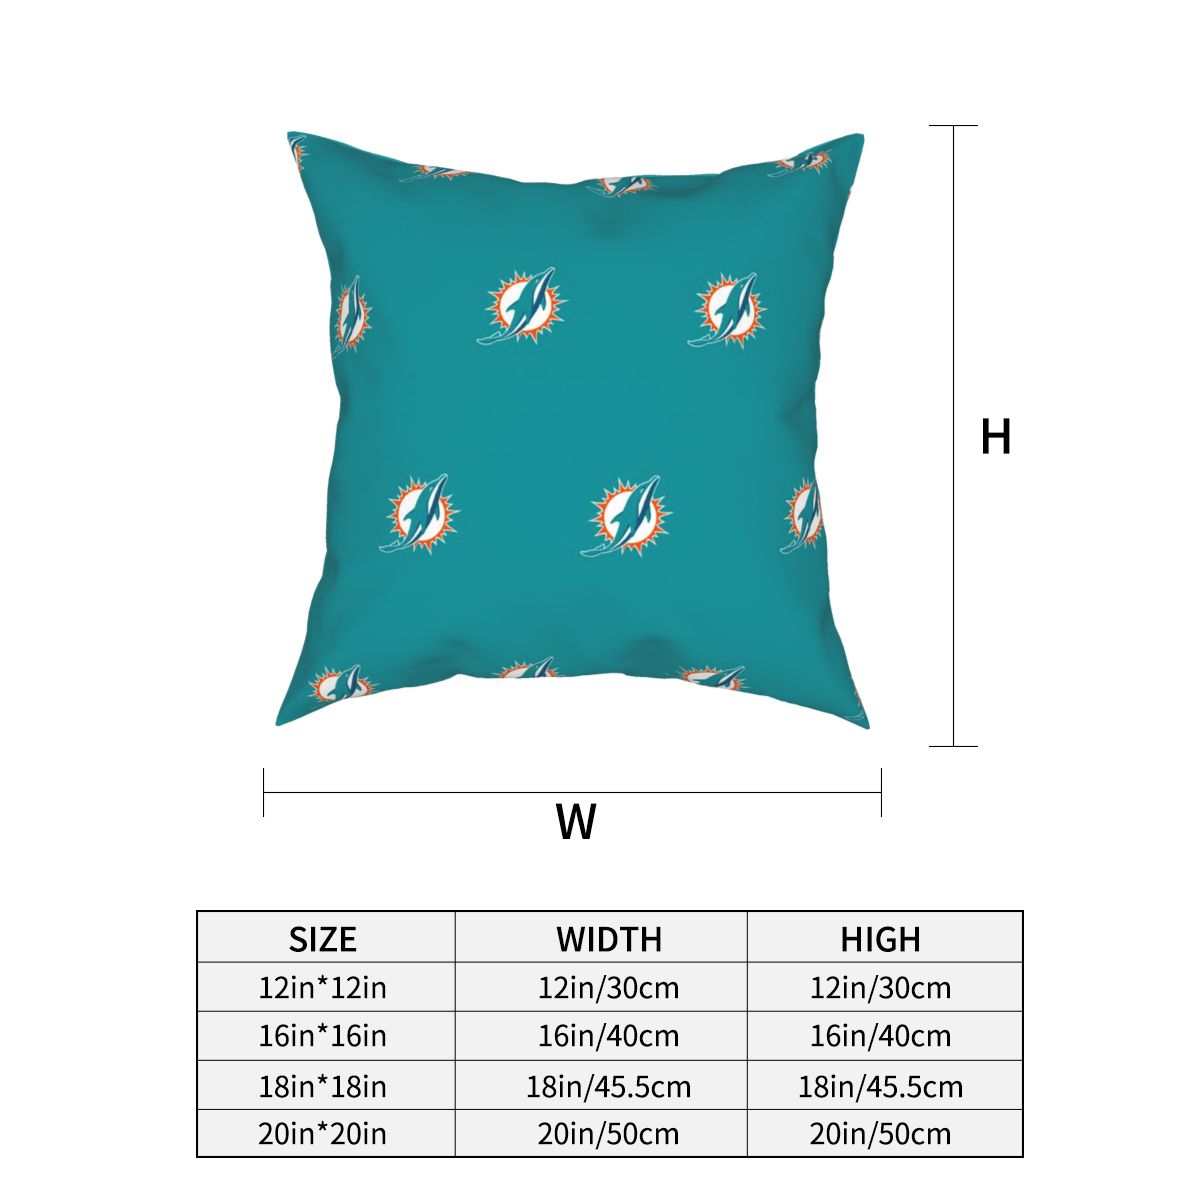 Custom Decorative Football Pillow Case Miami Dolphins Pillowcase Personalized Throw Pillow Covers